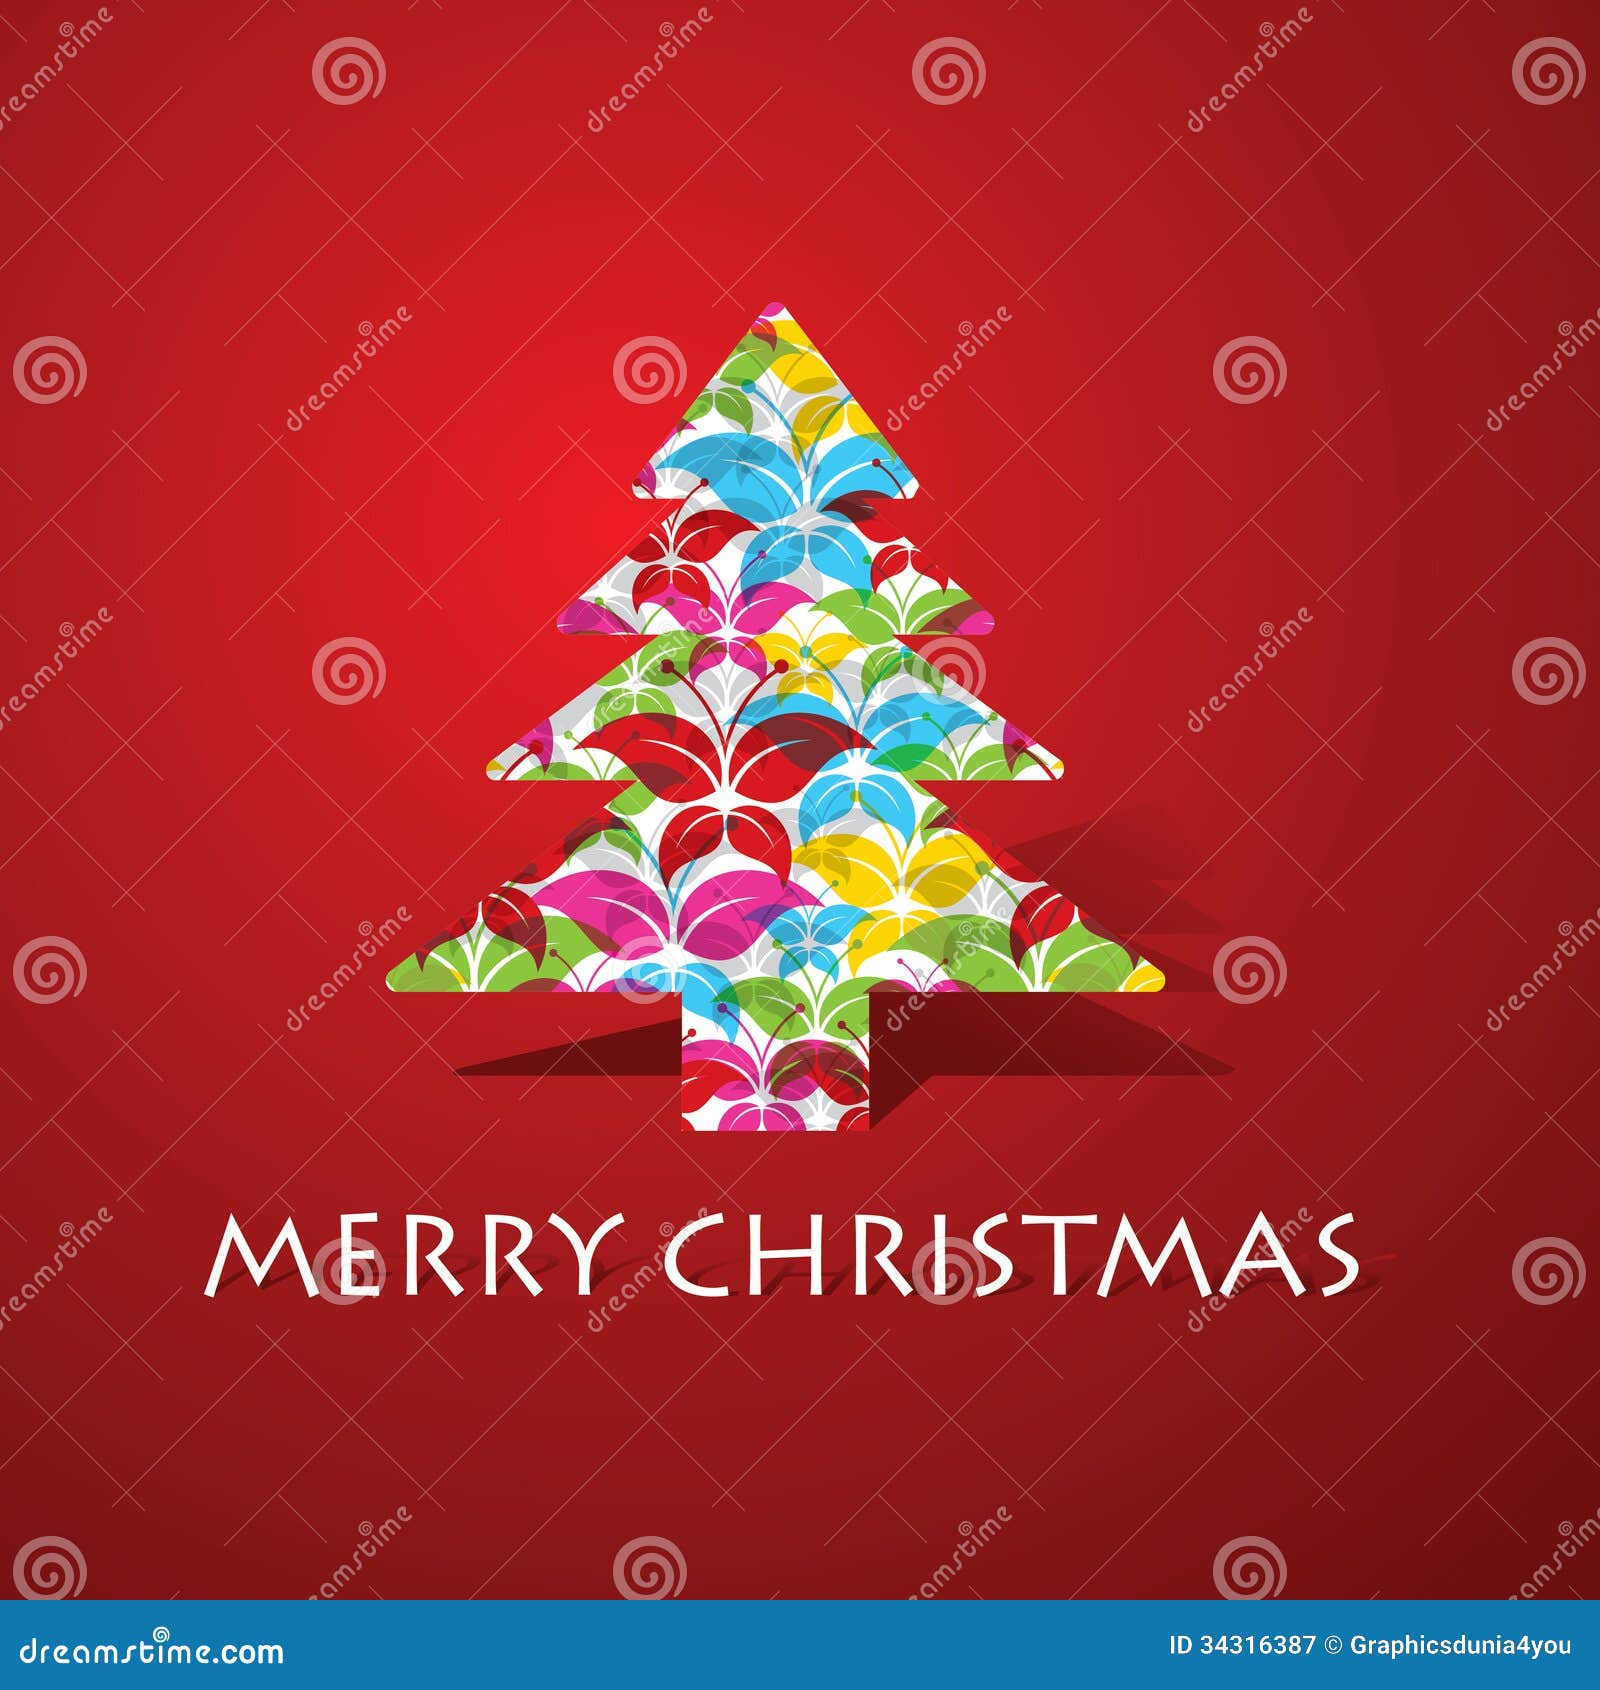 Colorful Butterfly Make a Christmas Tree Stock Vector - Illustration of ...